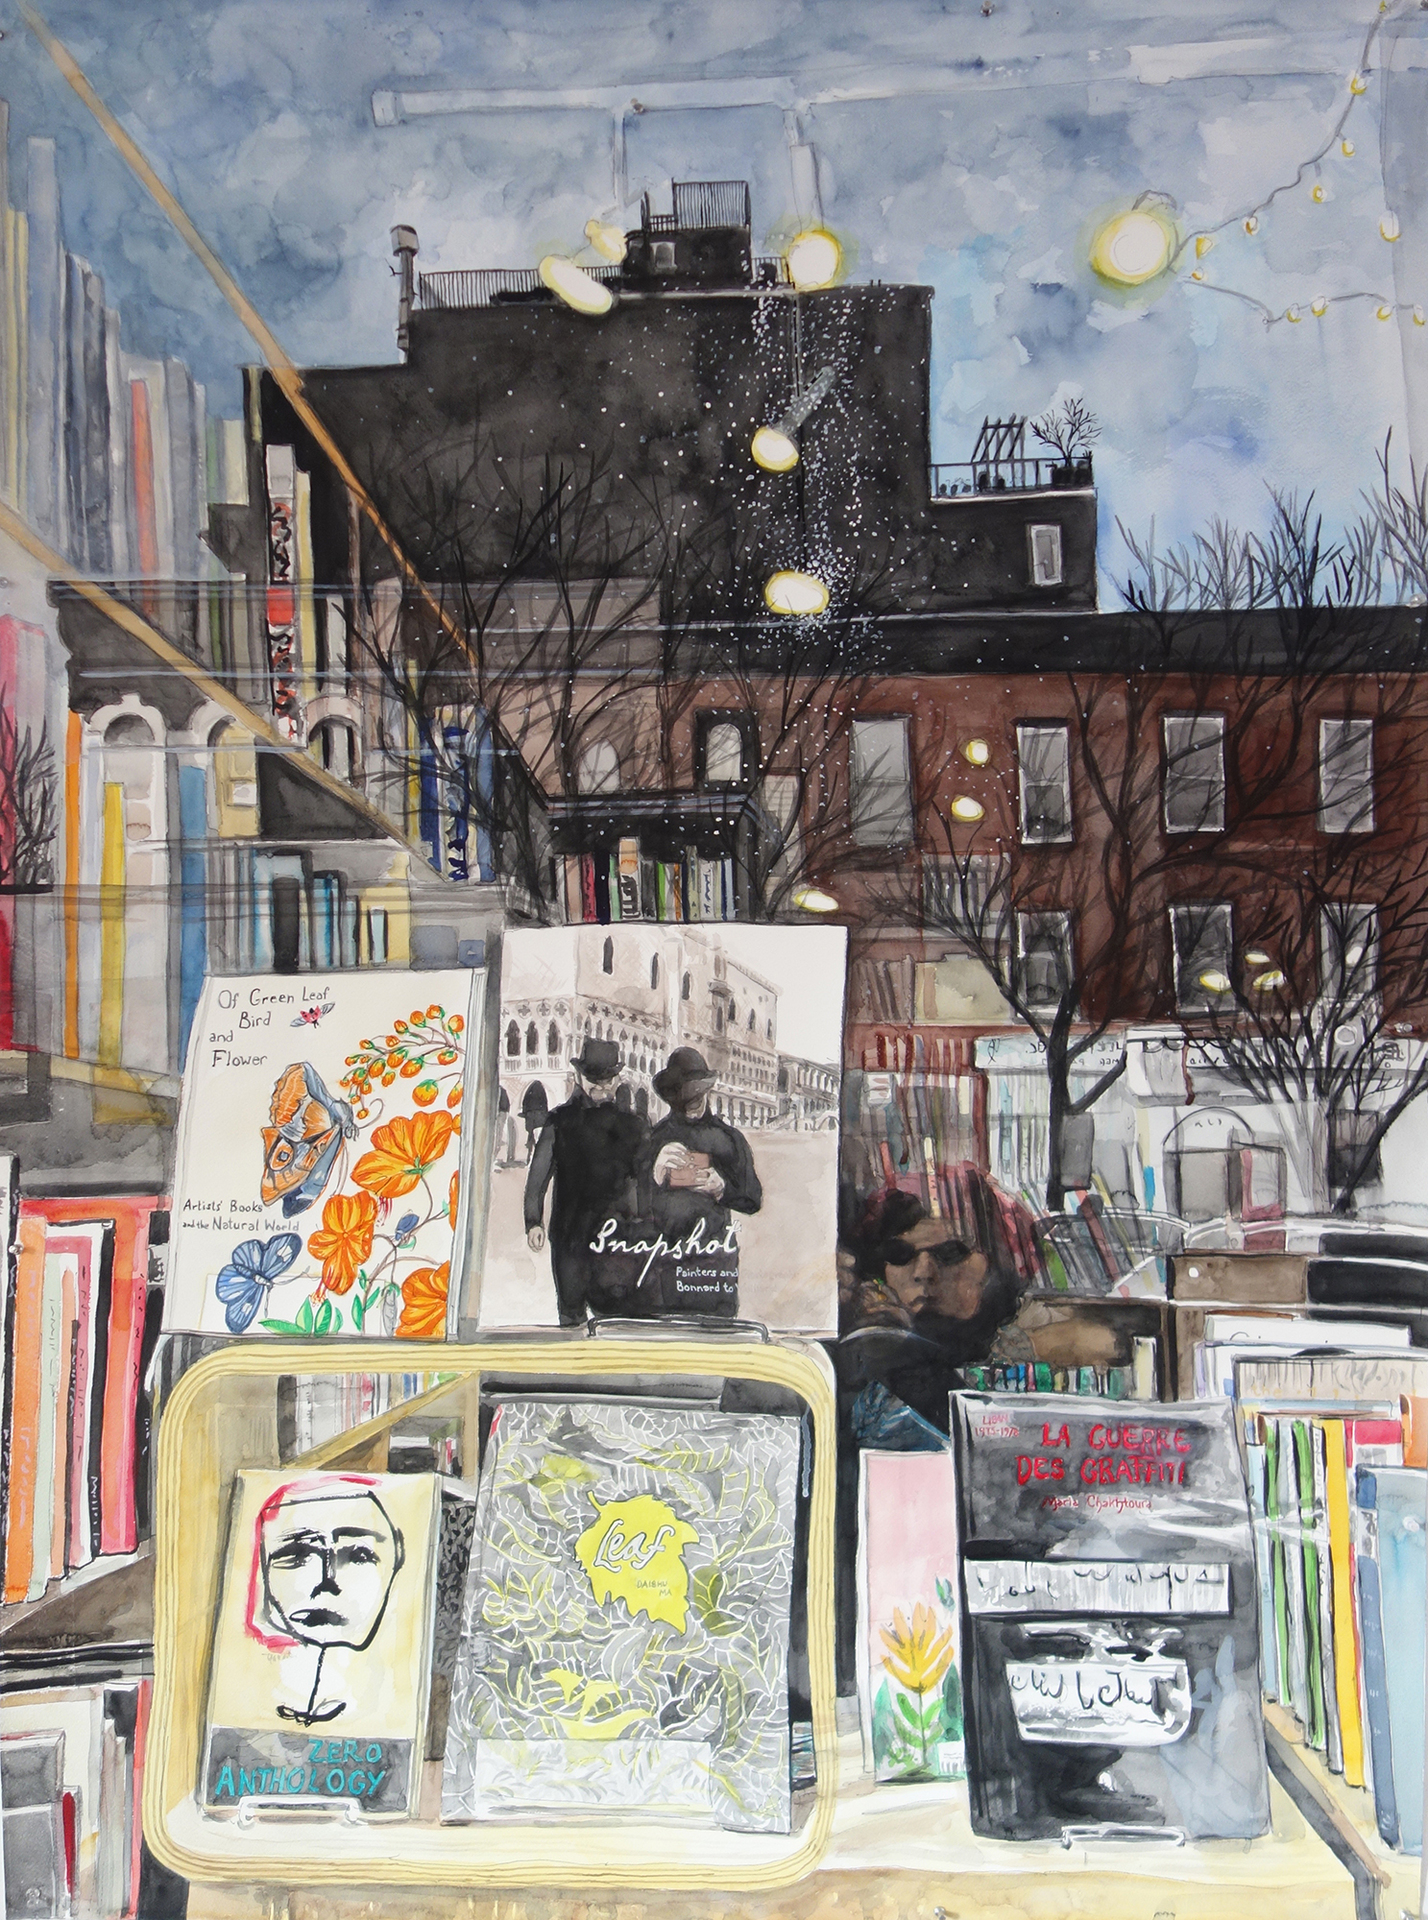 Watercolor painting of several books displayed in the window of a bookstore.